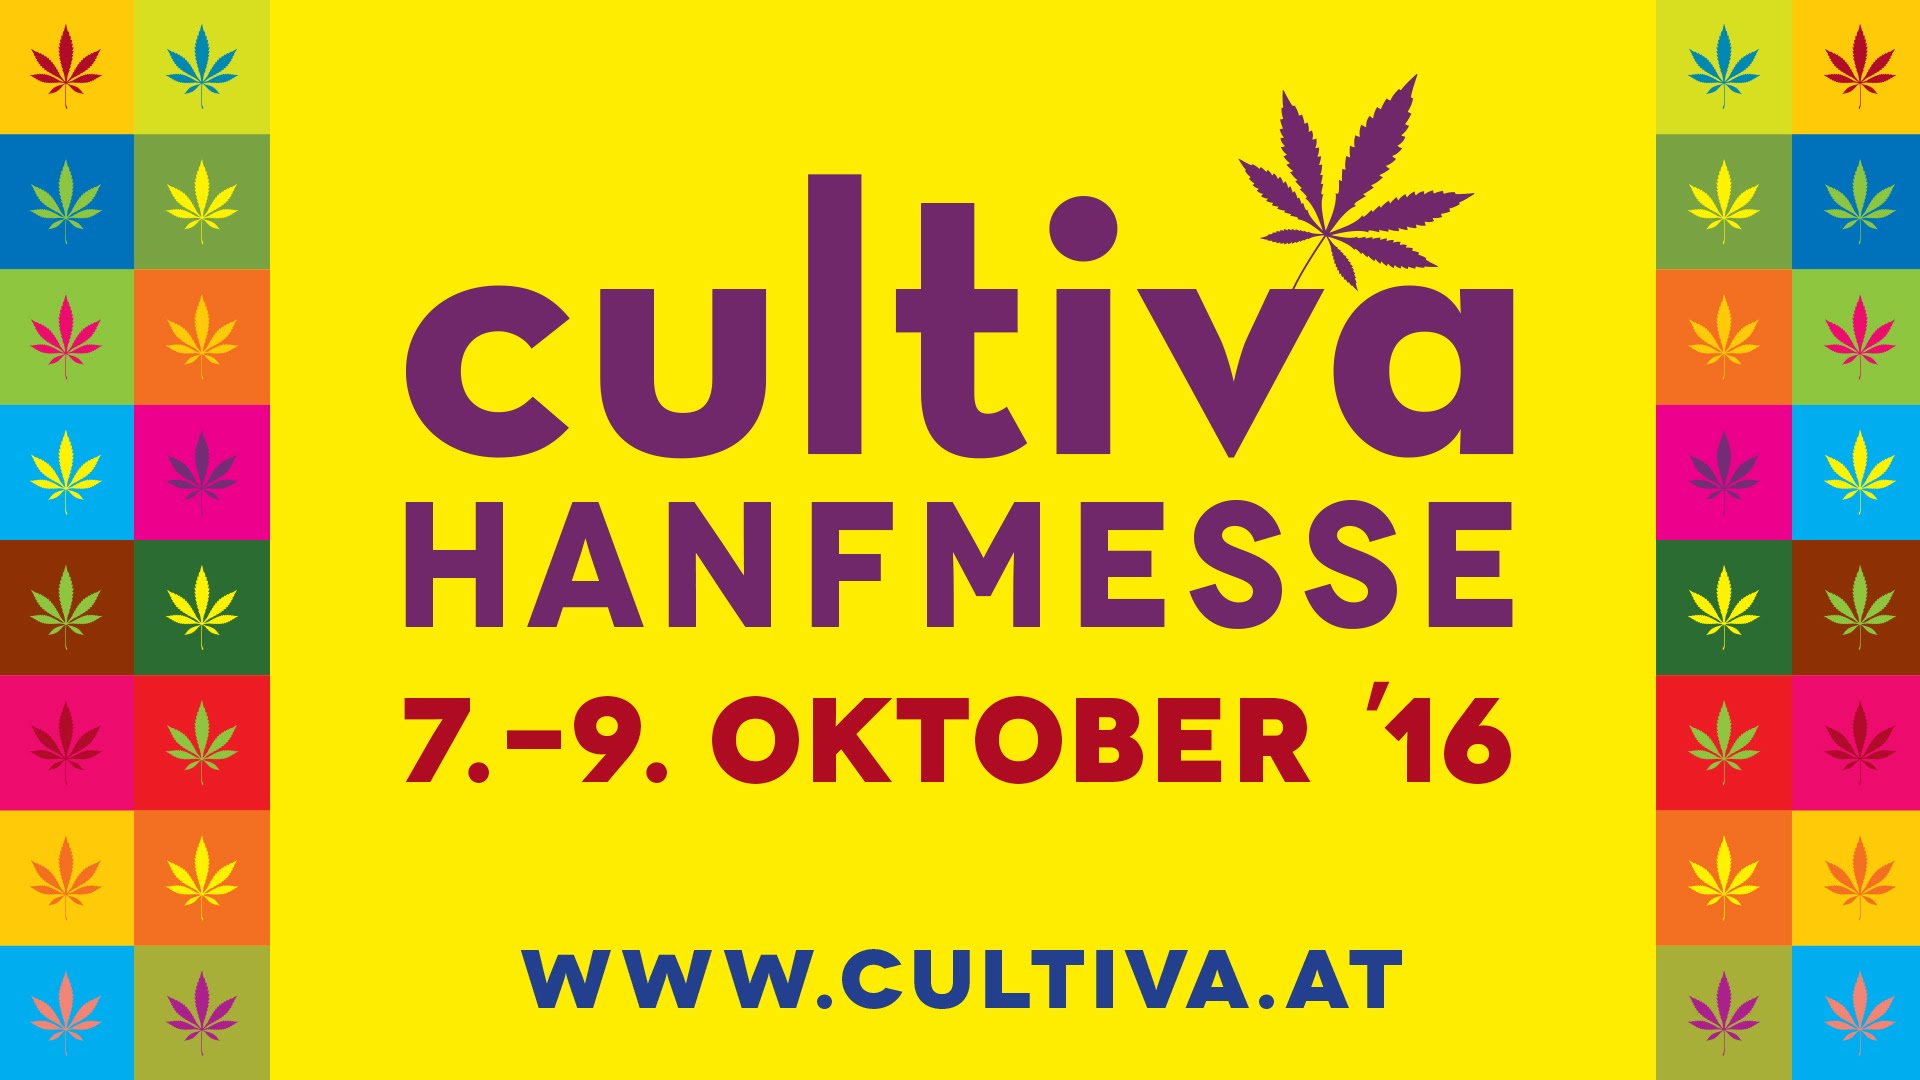 Everything about Cultiva Hanfmesse 2016